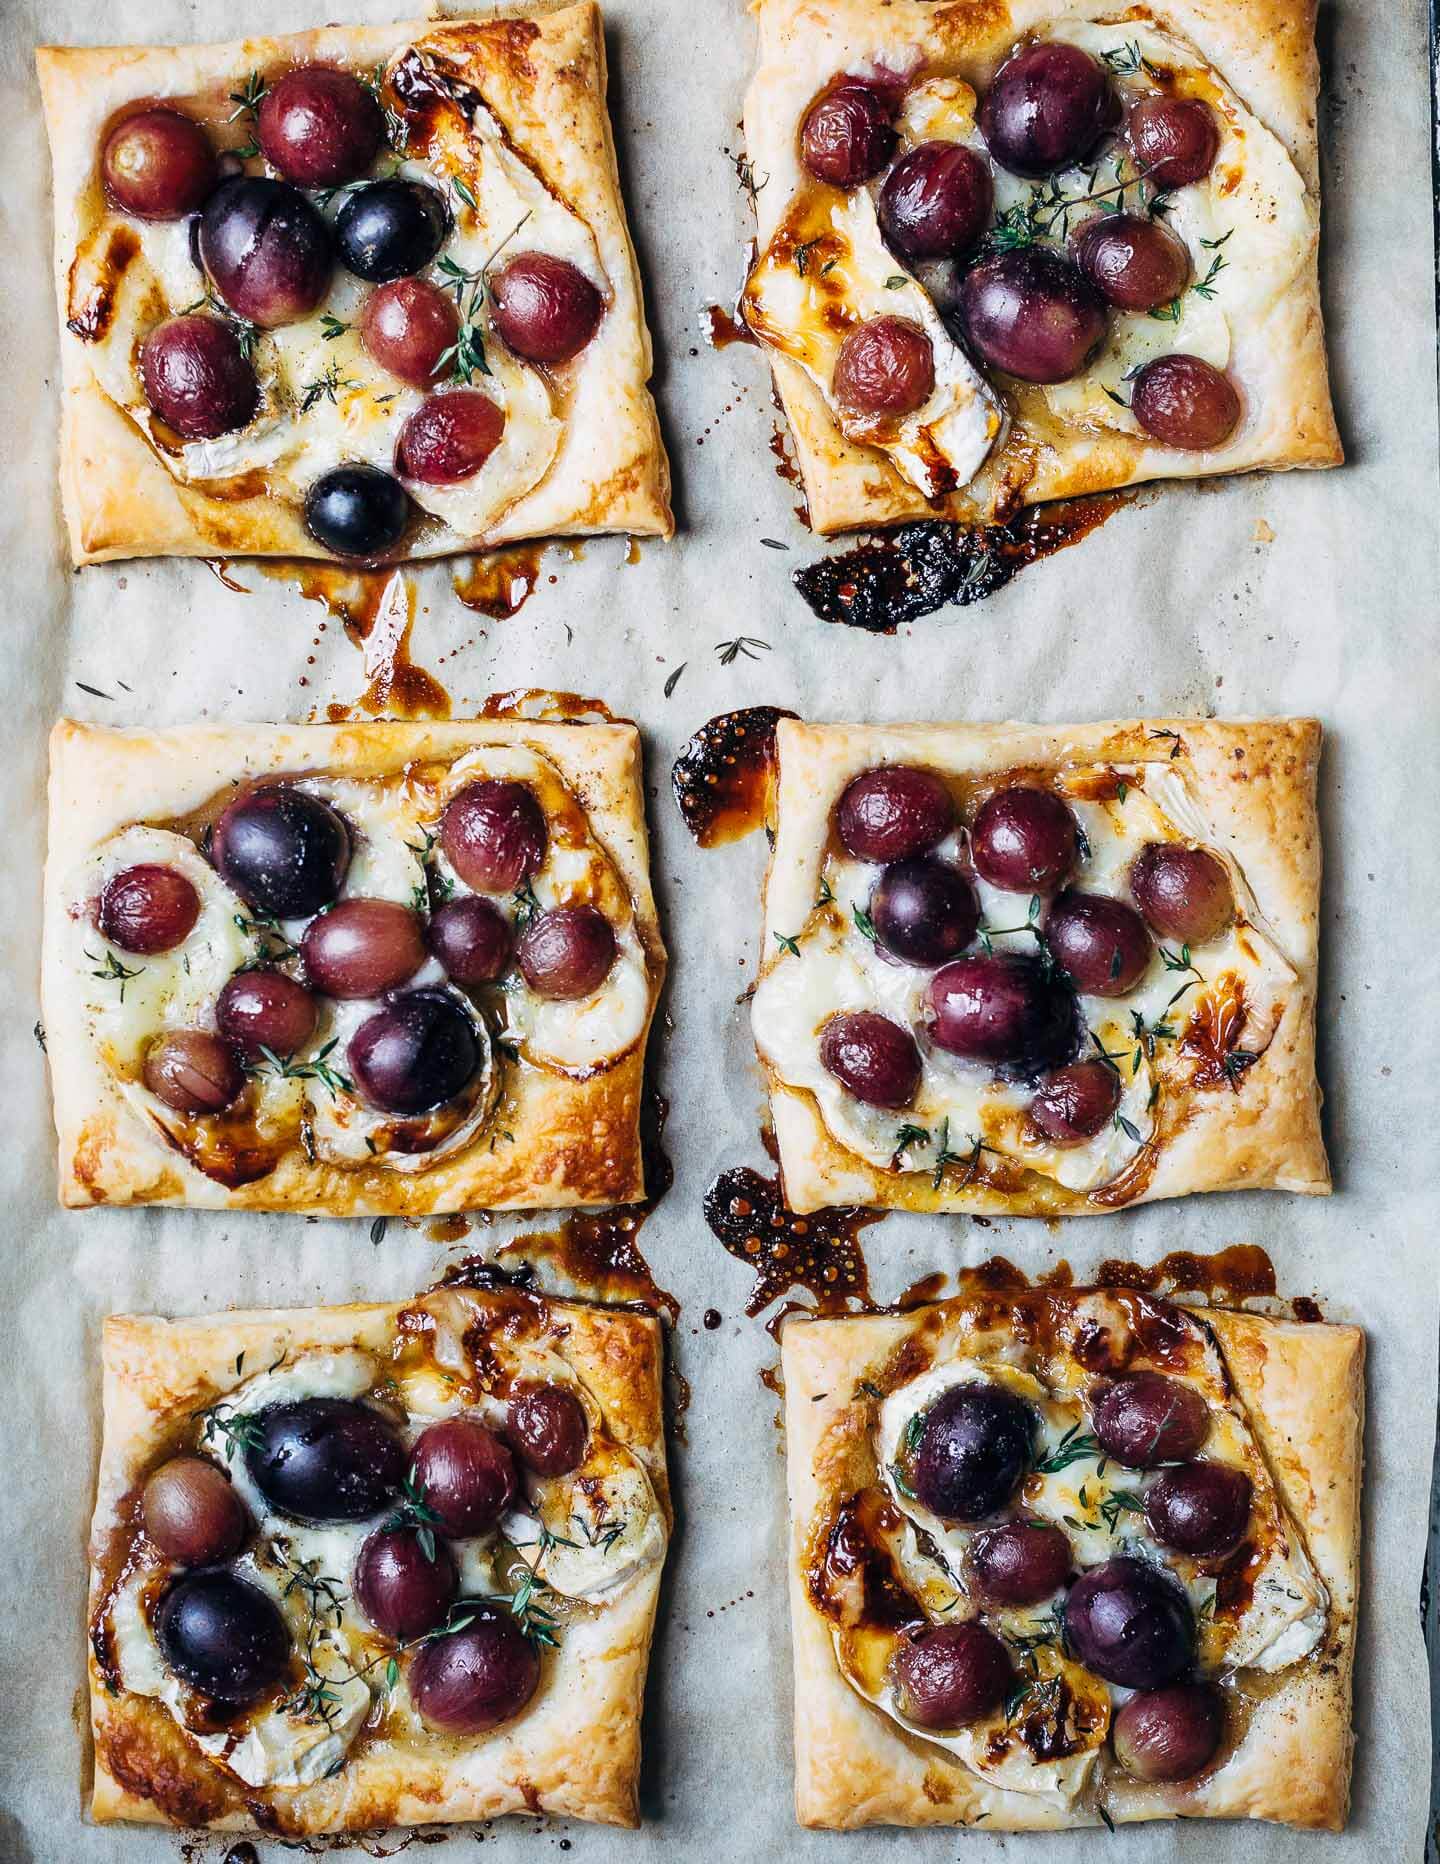 Sweet and savory brie and roasted grape tarts with a drizzle of honey, fresh thyme, and black pepper are the perfect simple-yet-decadent holiday appetizer.